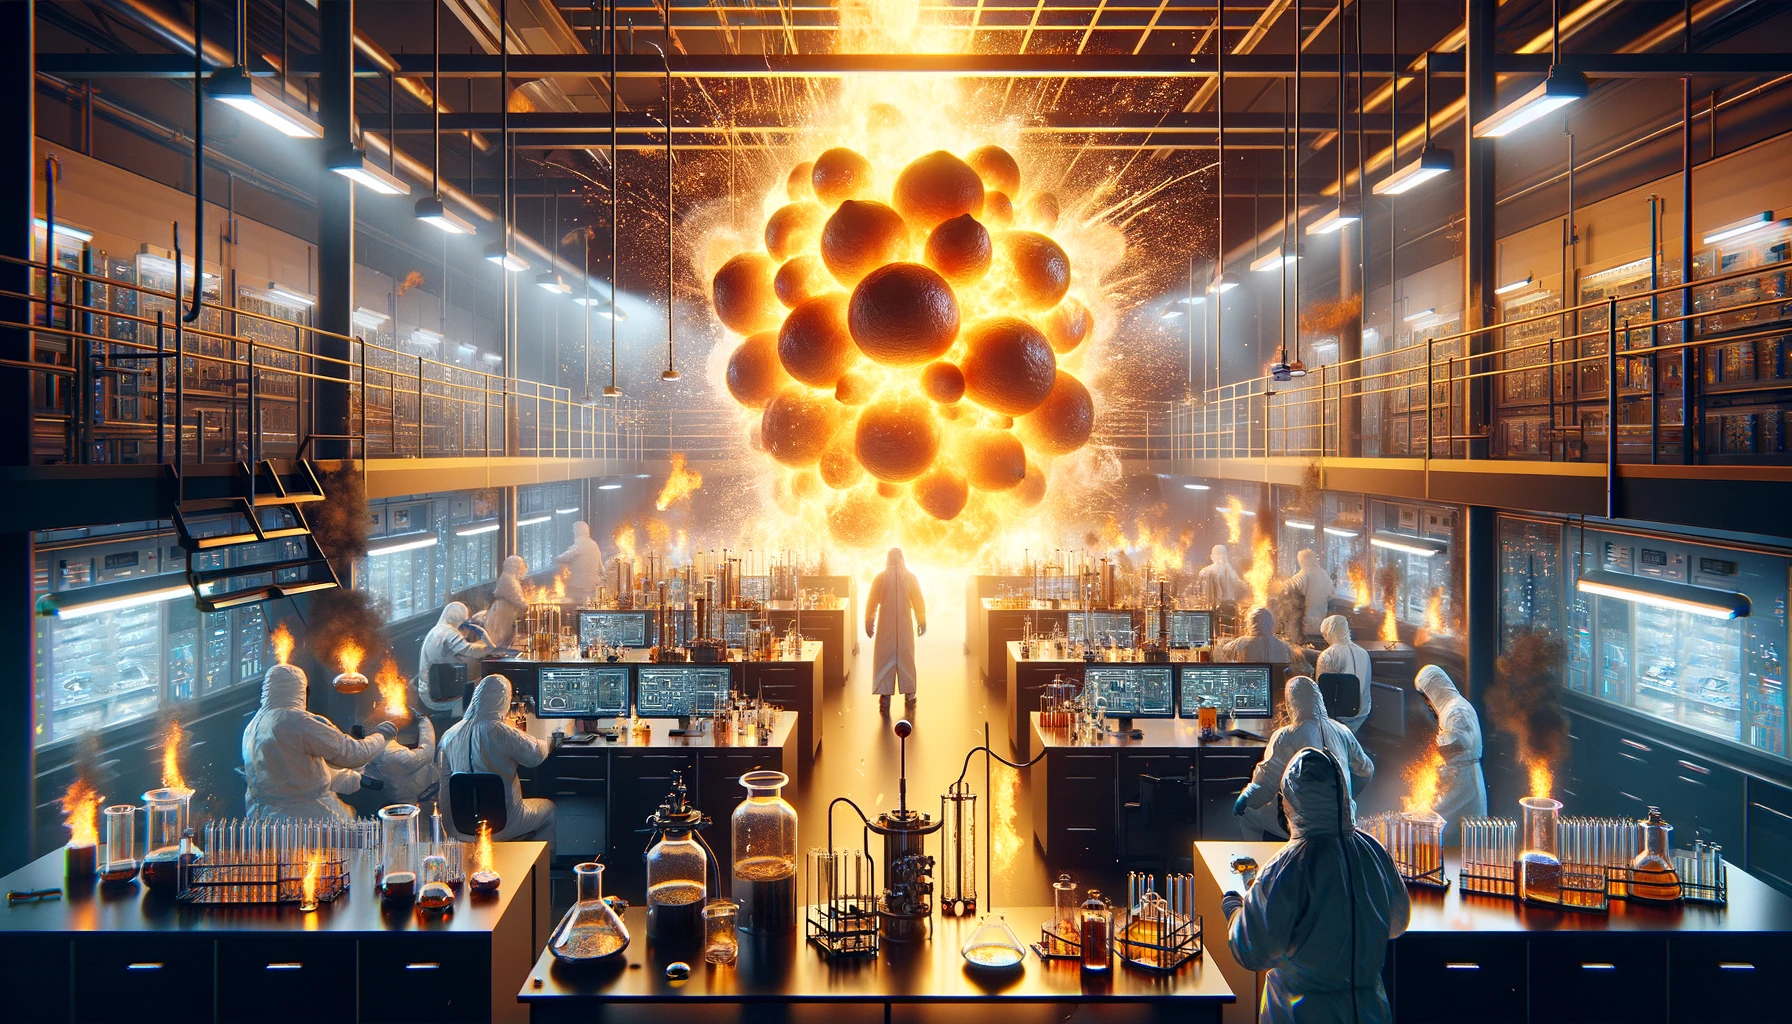 Visualize a widescreen scene in a high-tech research laboratory where the development of combustible lemons has taken a dramatic turn, resulting in more fire. The lab is now a flurry of activity as scientists in protective gear rush to contain a situation where several lemons have exploded simultaneously. Flames and sparks fill the air, highlighting the volatile nature of these experimental fruits. Amidst the chaos, advanced scientific equipment is visible, including test tubes, beakers, and digital monitors flashing emergency alerts. The center of the lab shows the epicenter of the explosion, with remnants of lemons and a bright, fiery glow indicating the source of the combustion. Despite the danger, the atmosphere is still one of innovation, as the team works diligently to understand and harness the power of combustible lemons. The lighting is intense, with the fire casting dynamic shadows and illuminating the faces of the focused scientists.